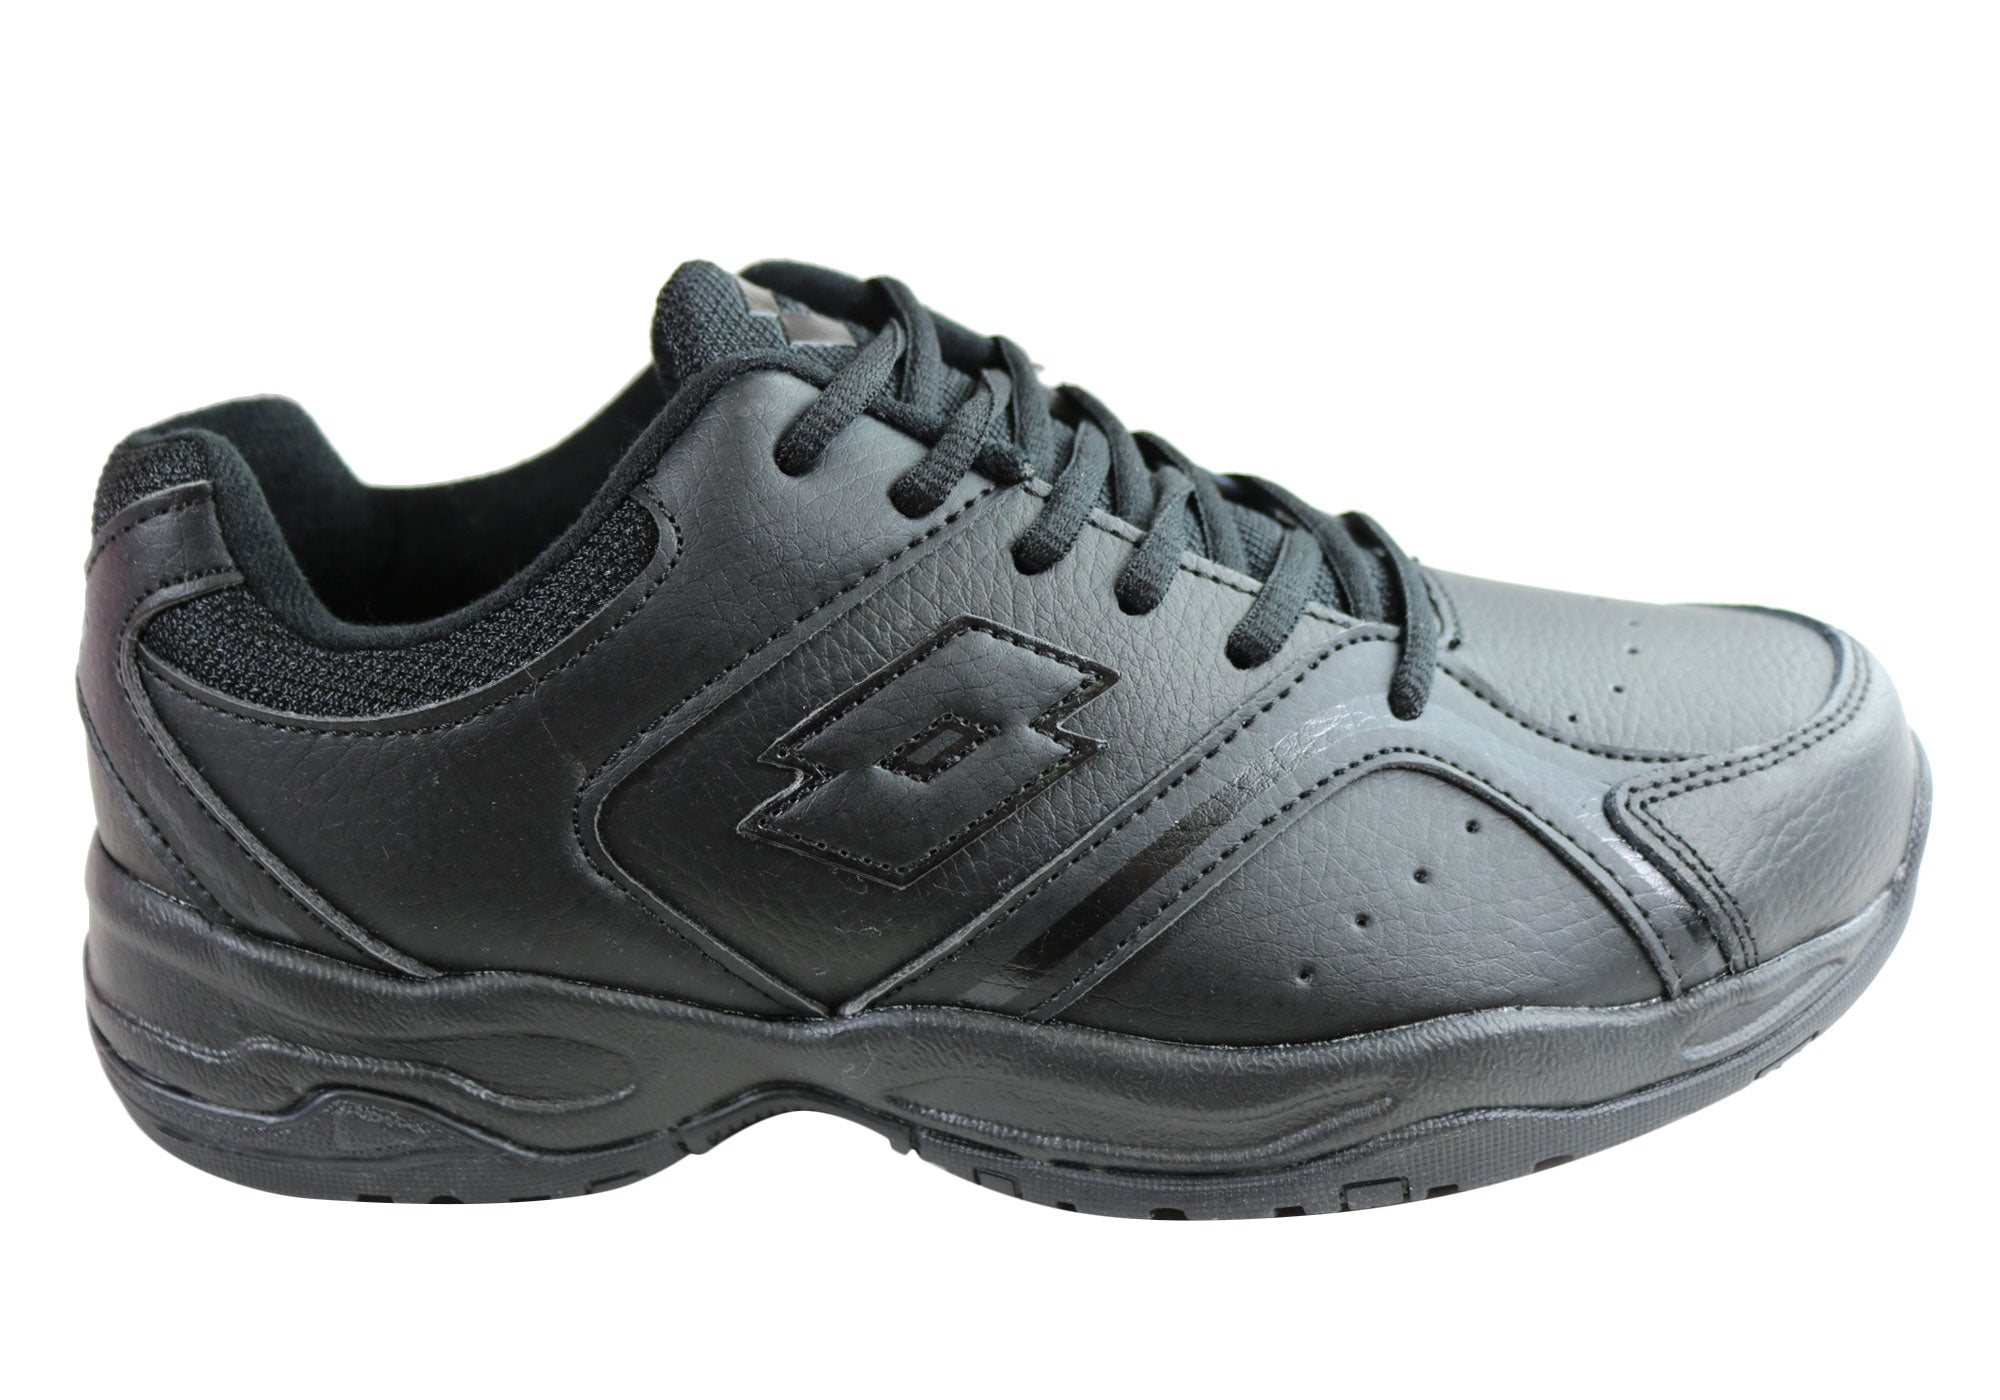 Lotto Sport Italia - Footwear, clothing and accessories for sport and  leisure time.